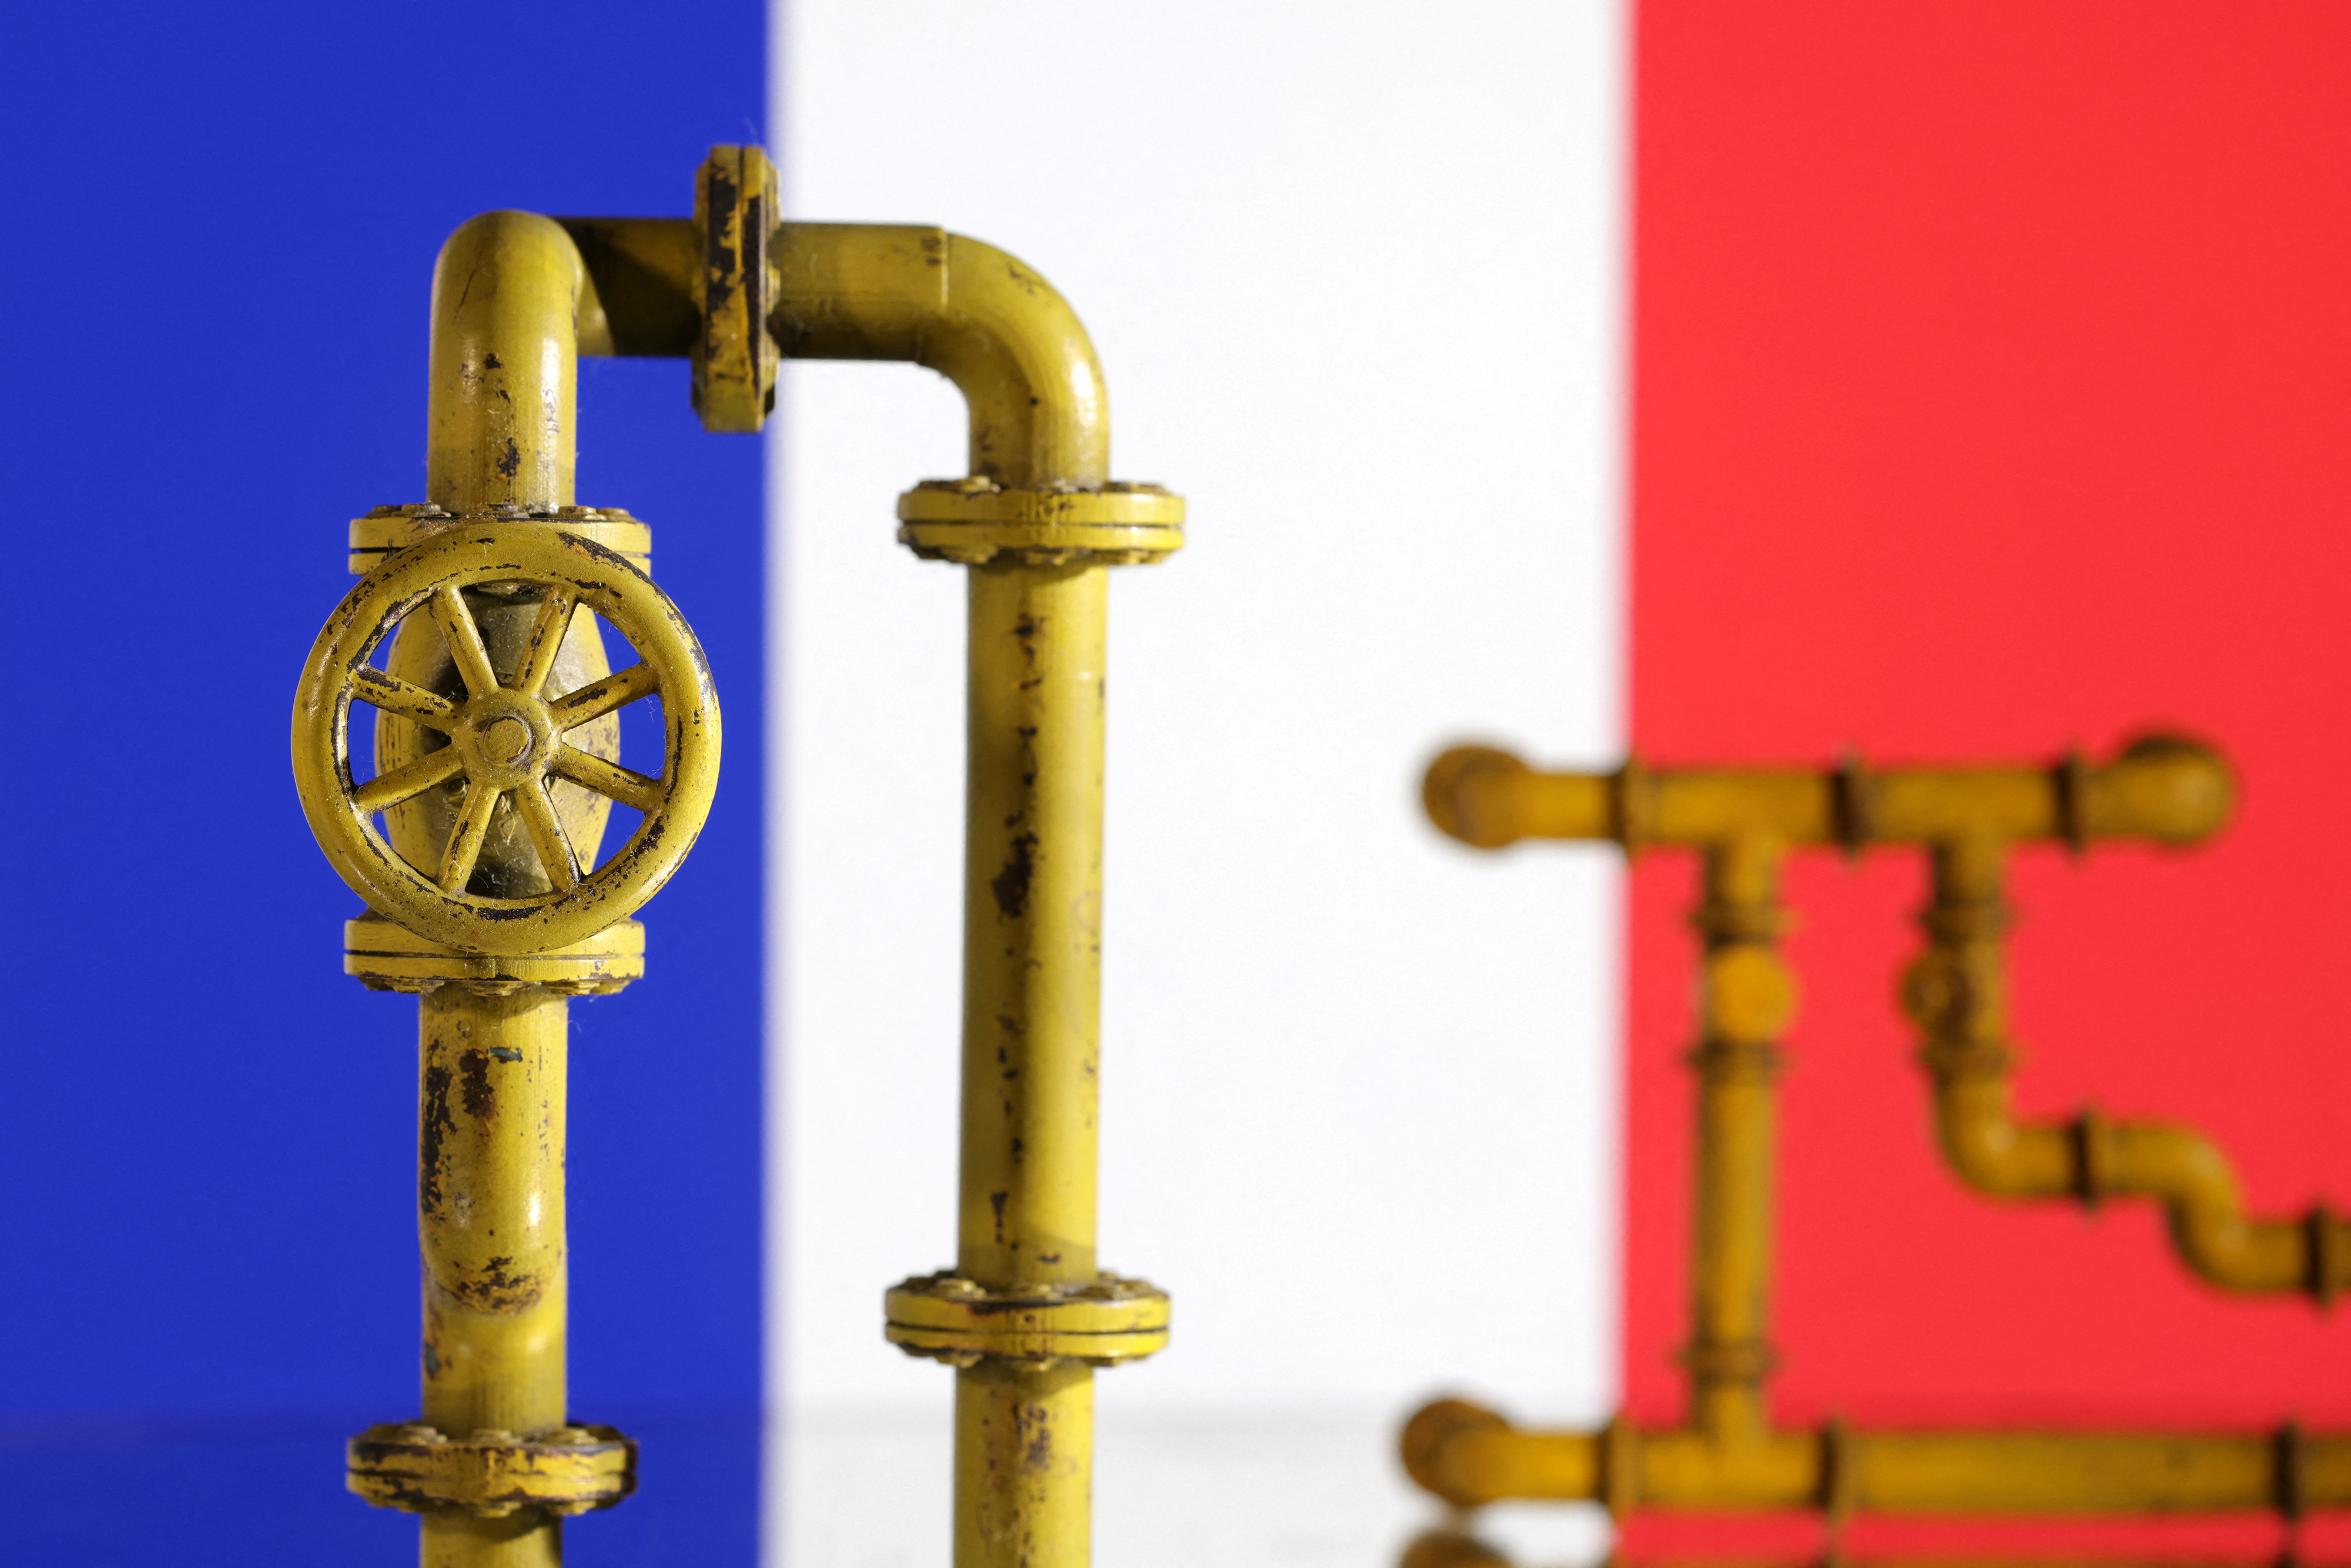 Illustration shows natural gas pipeline and France flag